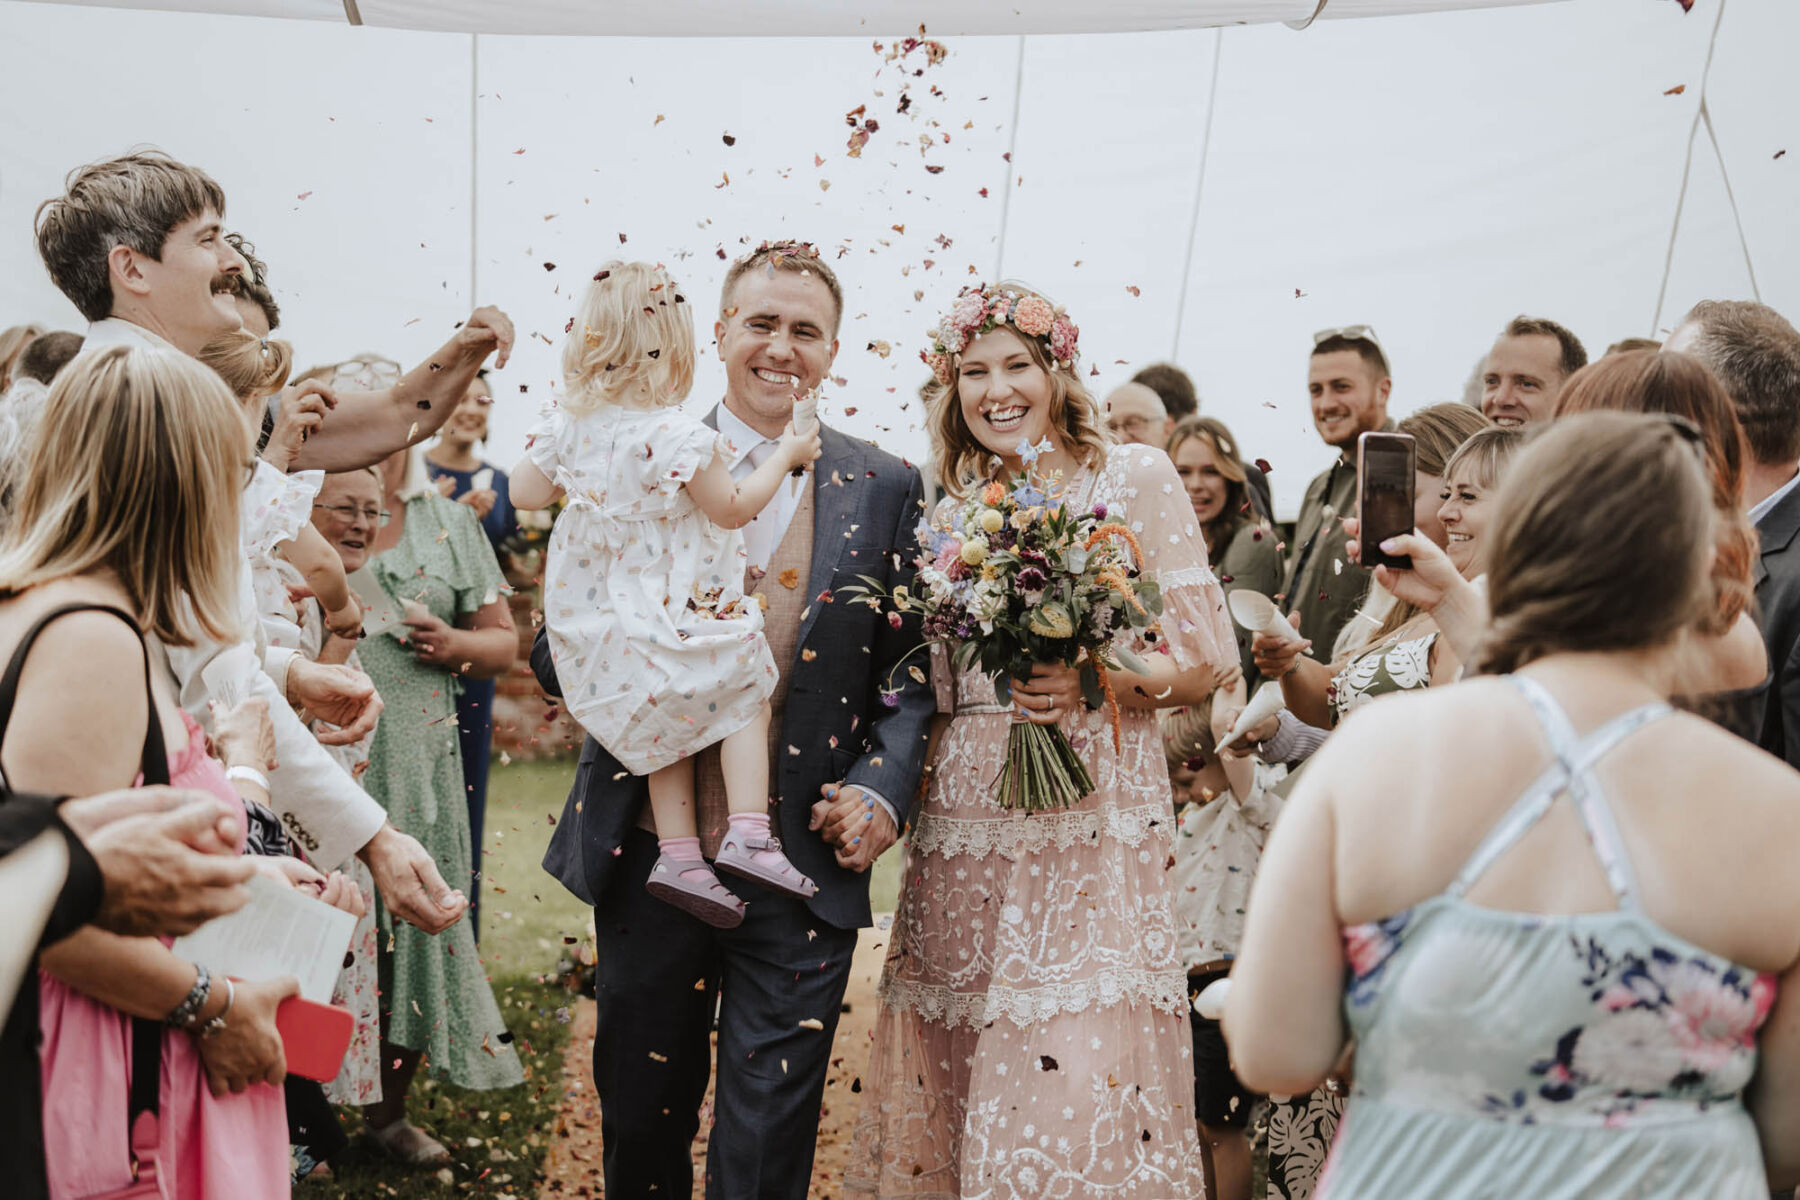 Bride in pale pink Needle & Thread wedding dress. Confetti shot. Groom carries little flower girl in his arms.